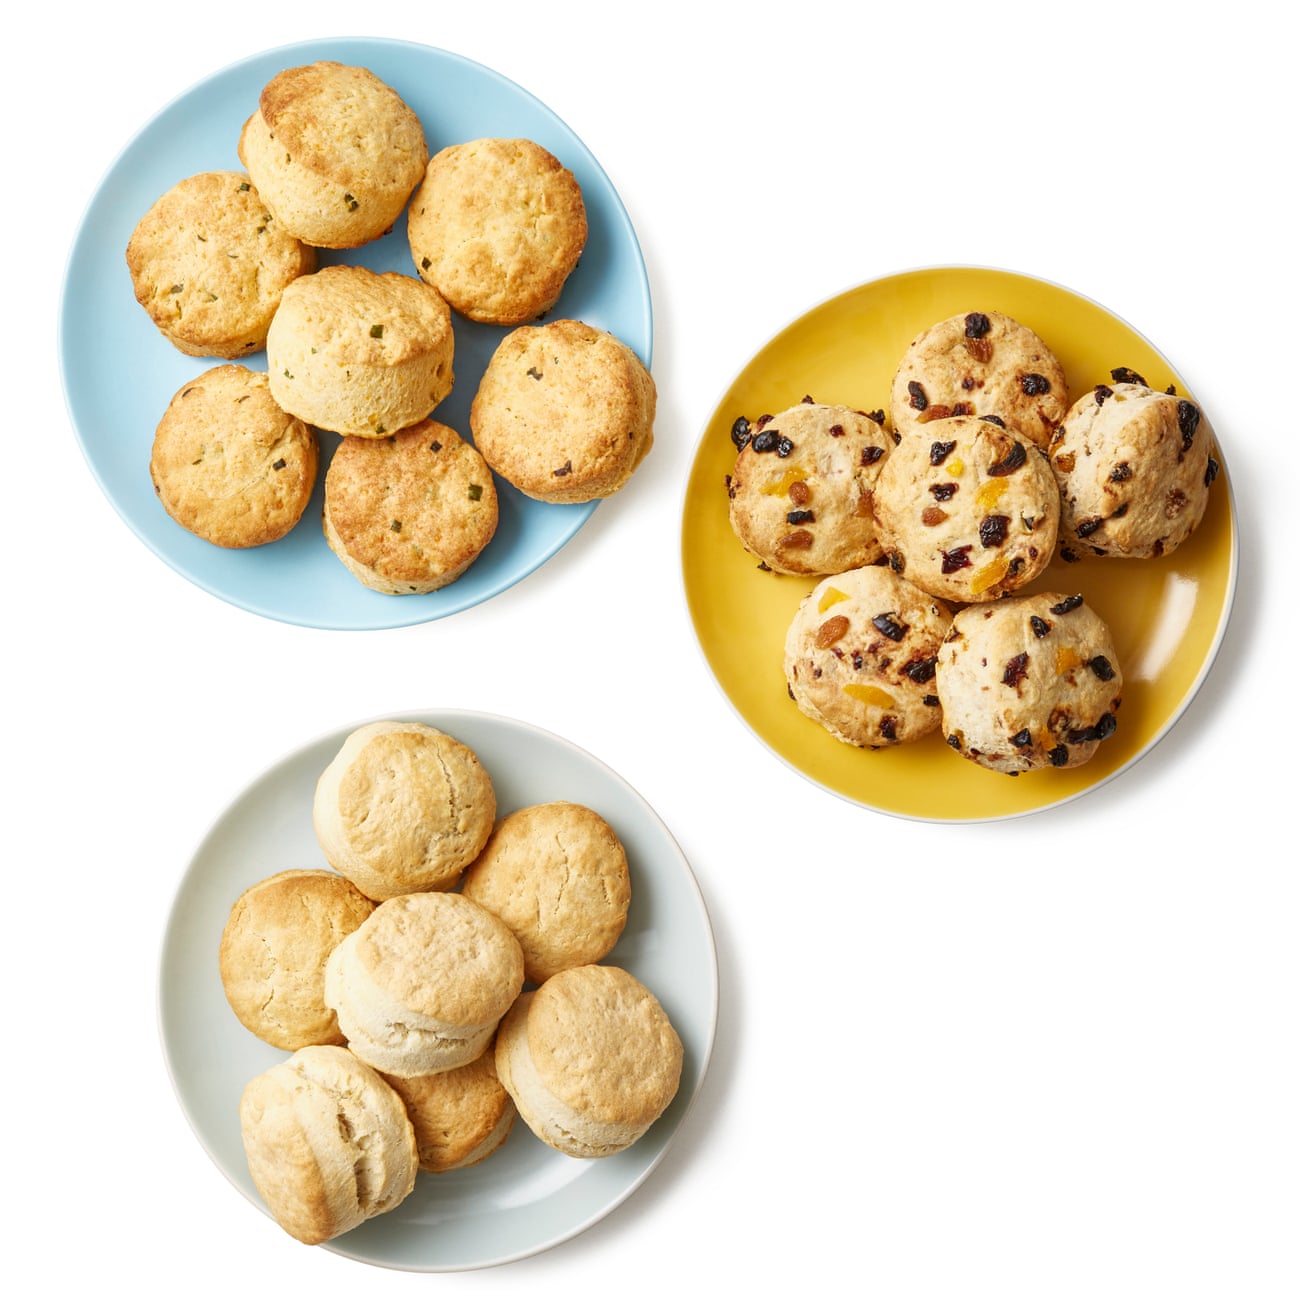 Felicity Cloake's sweet and savoury scones.